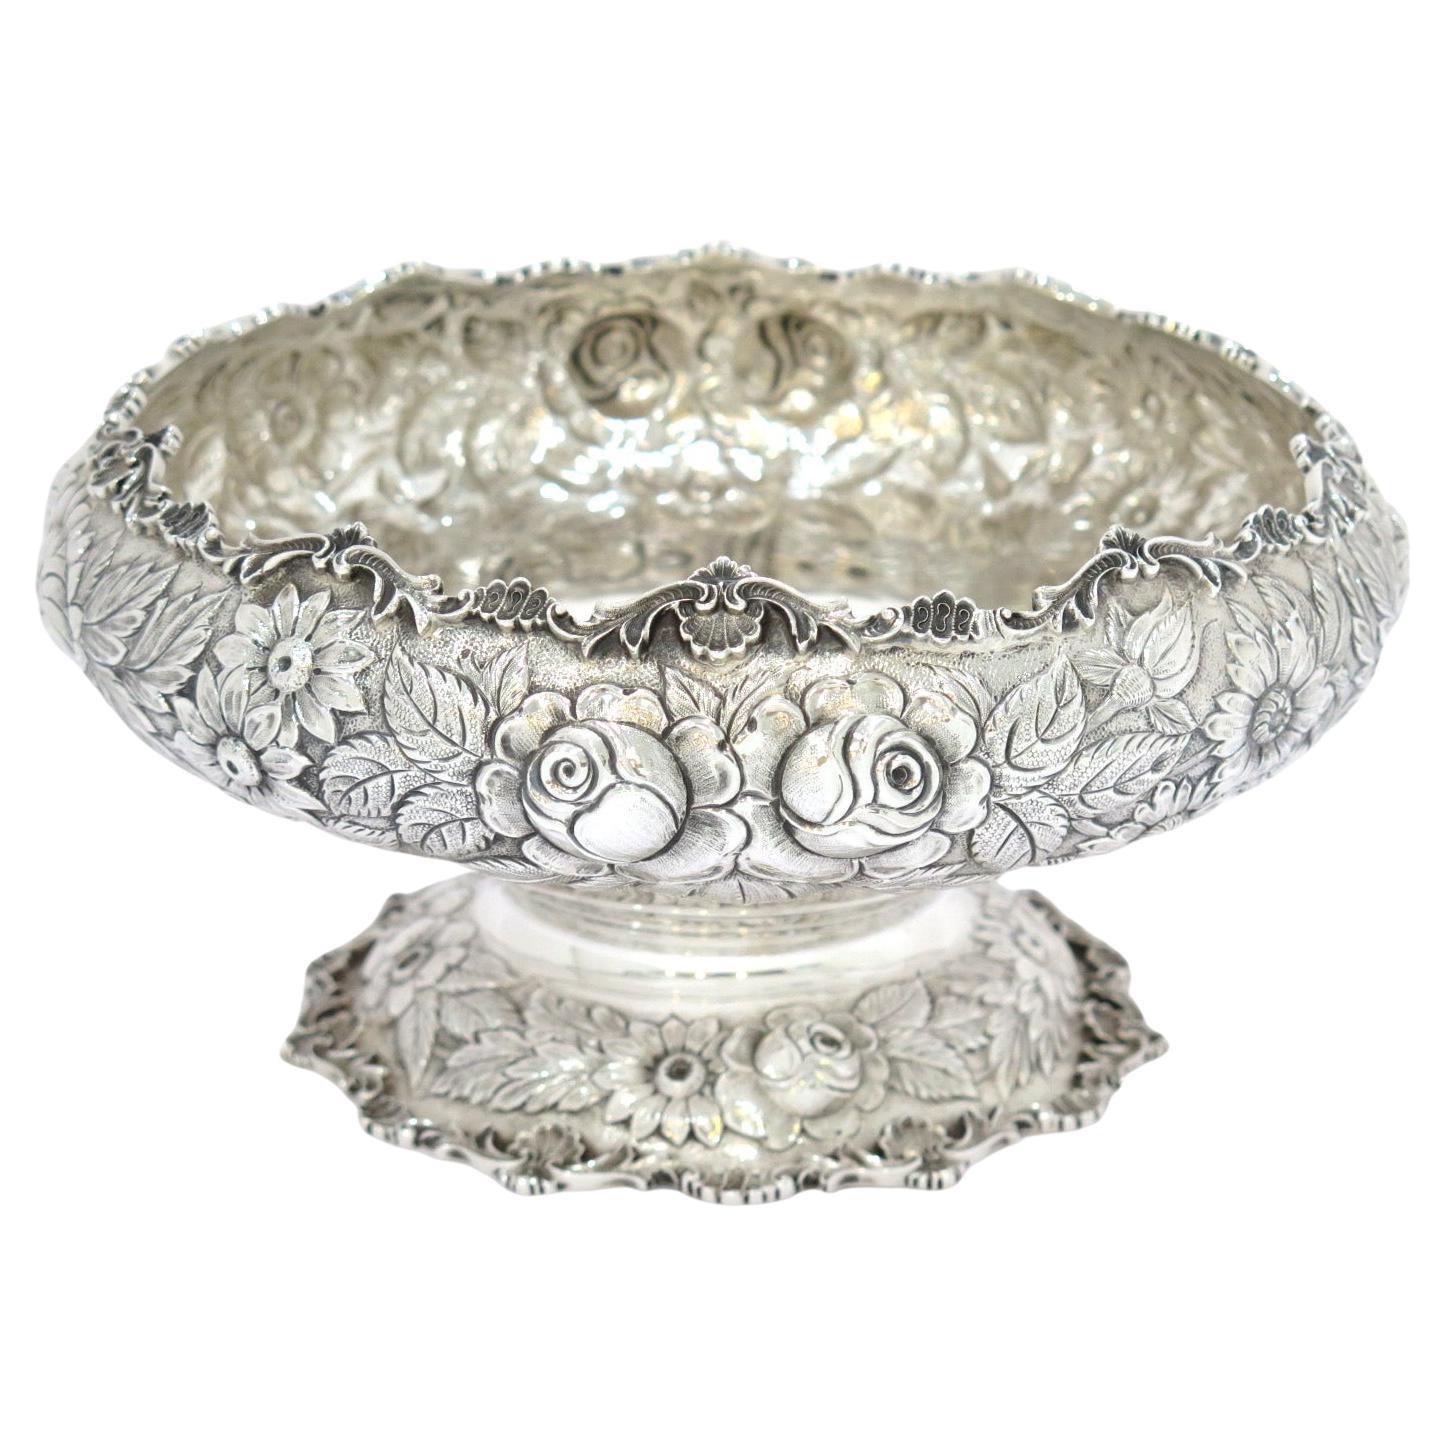 Sterling Silver S. Kirk & Son Vintage Floral Repousse Footed Serving Bowl